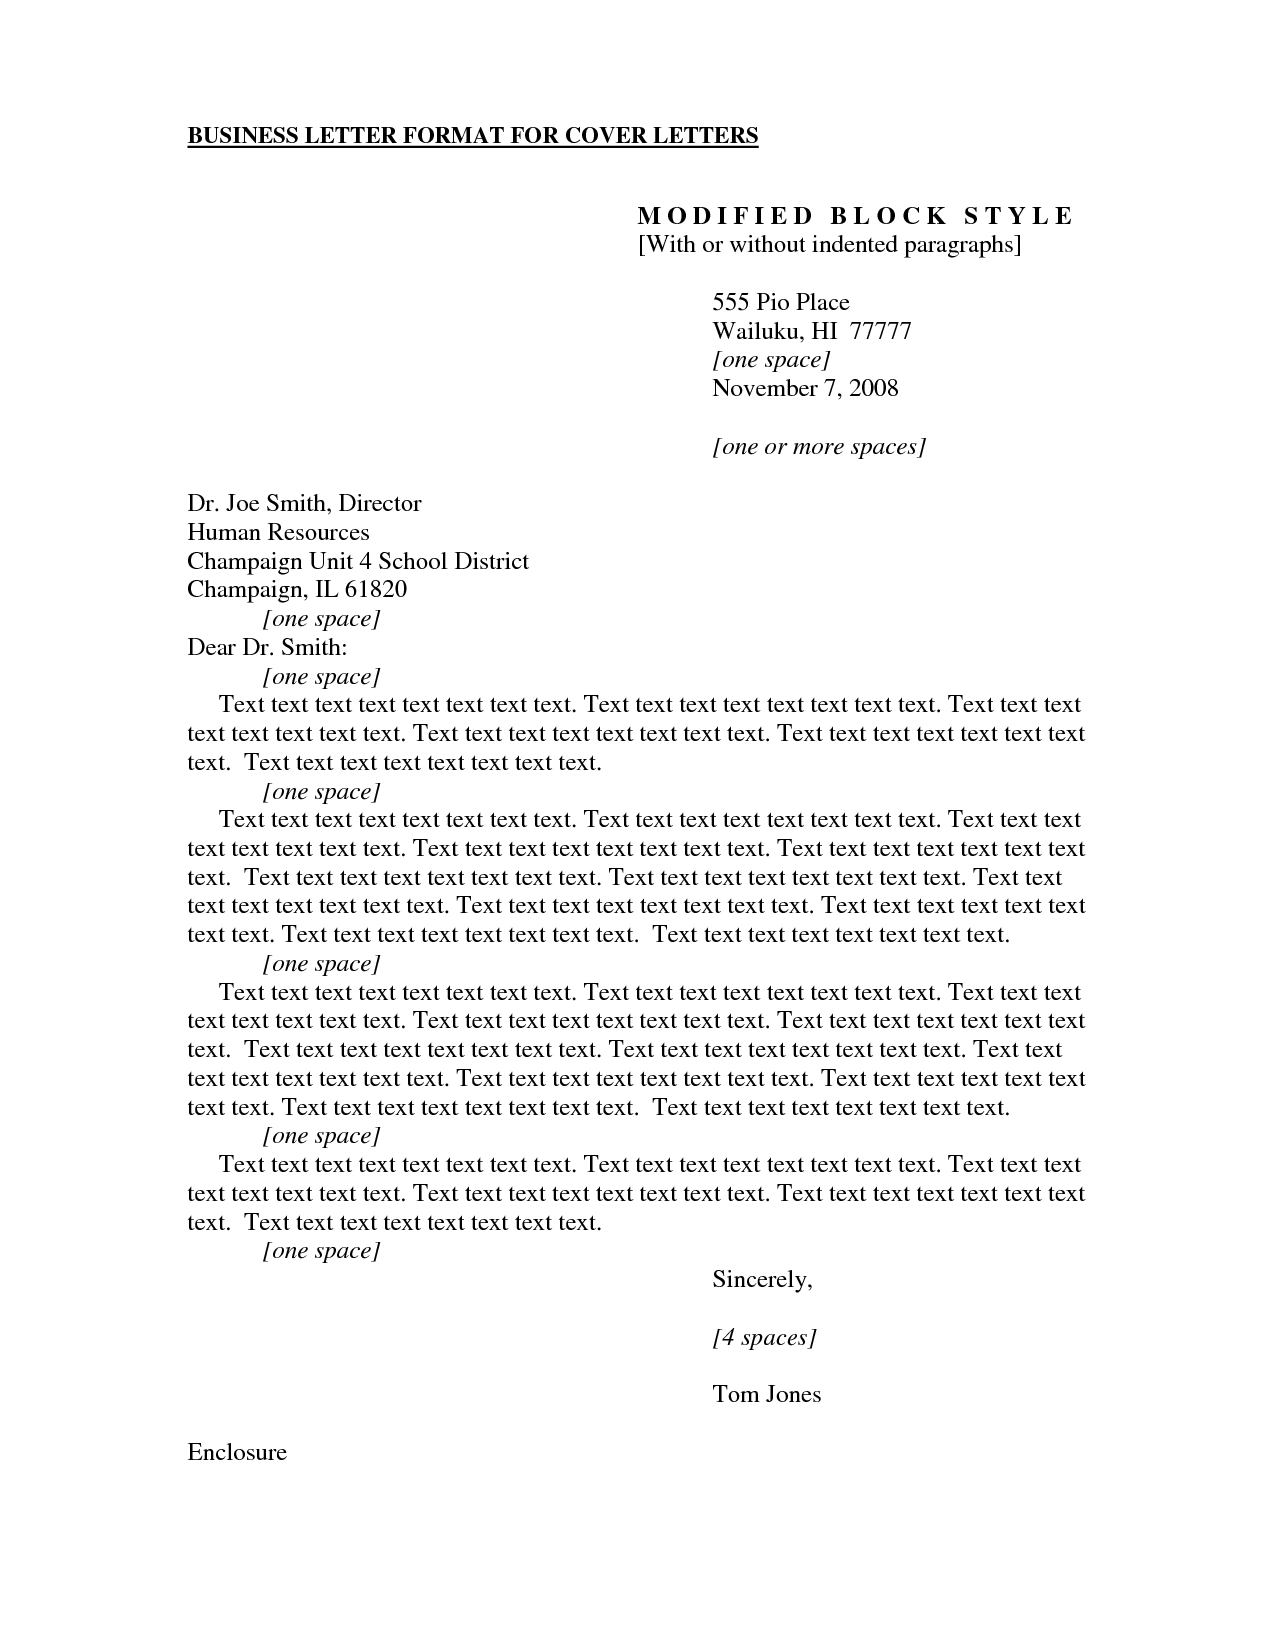 apa format cover letter apa example cover letter cover letter